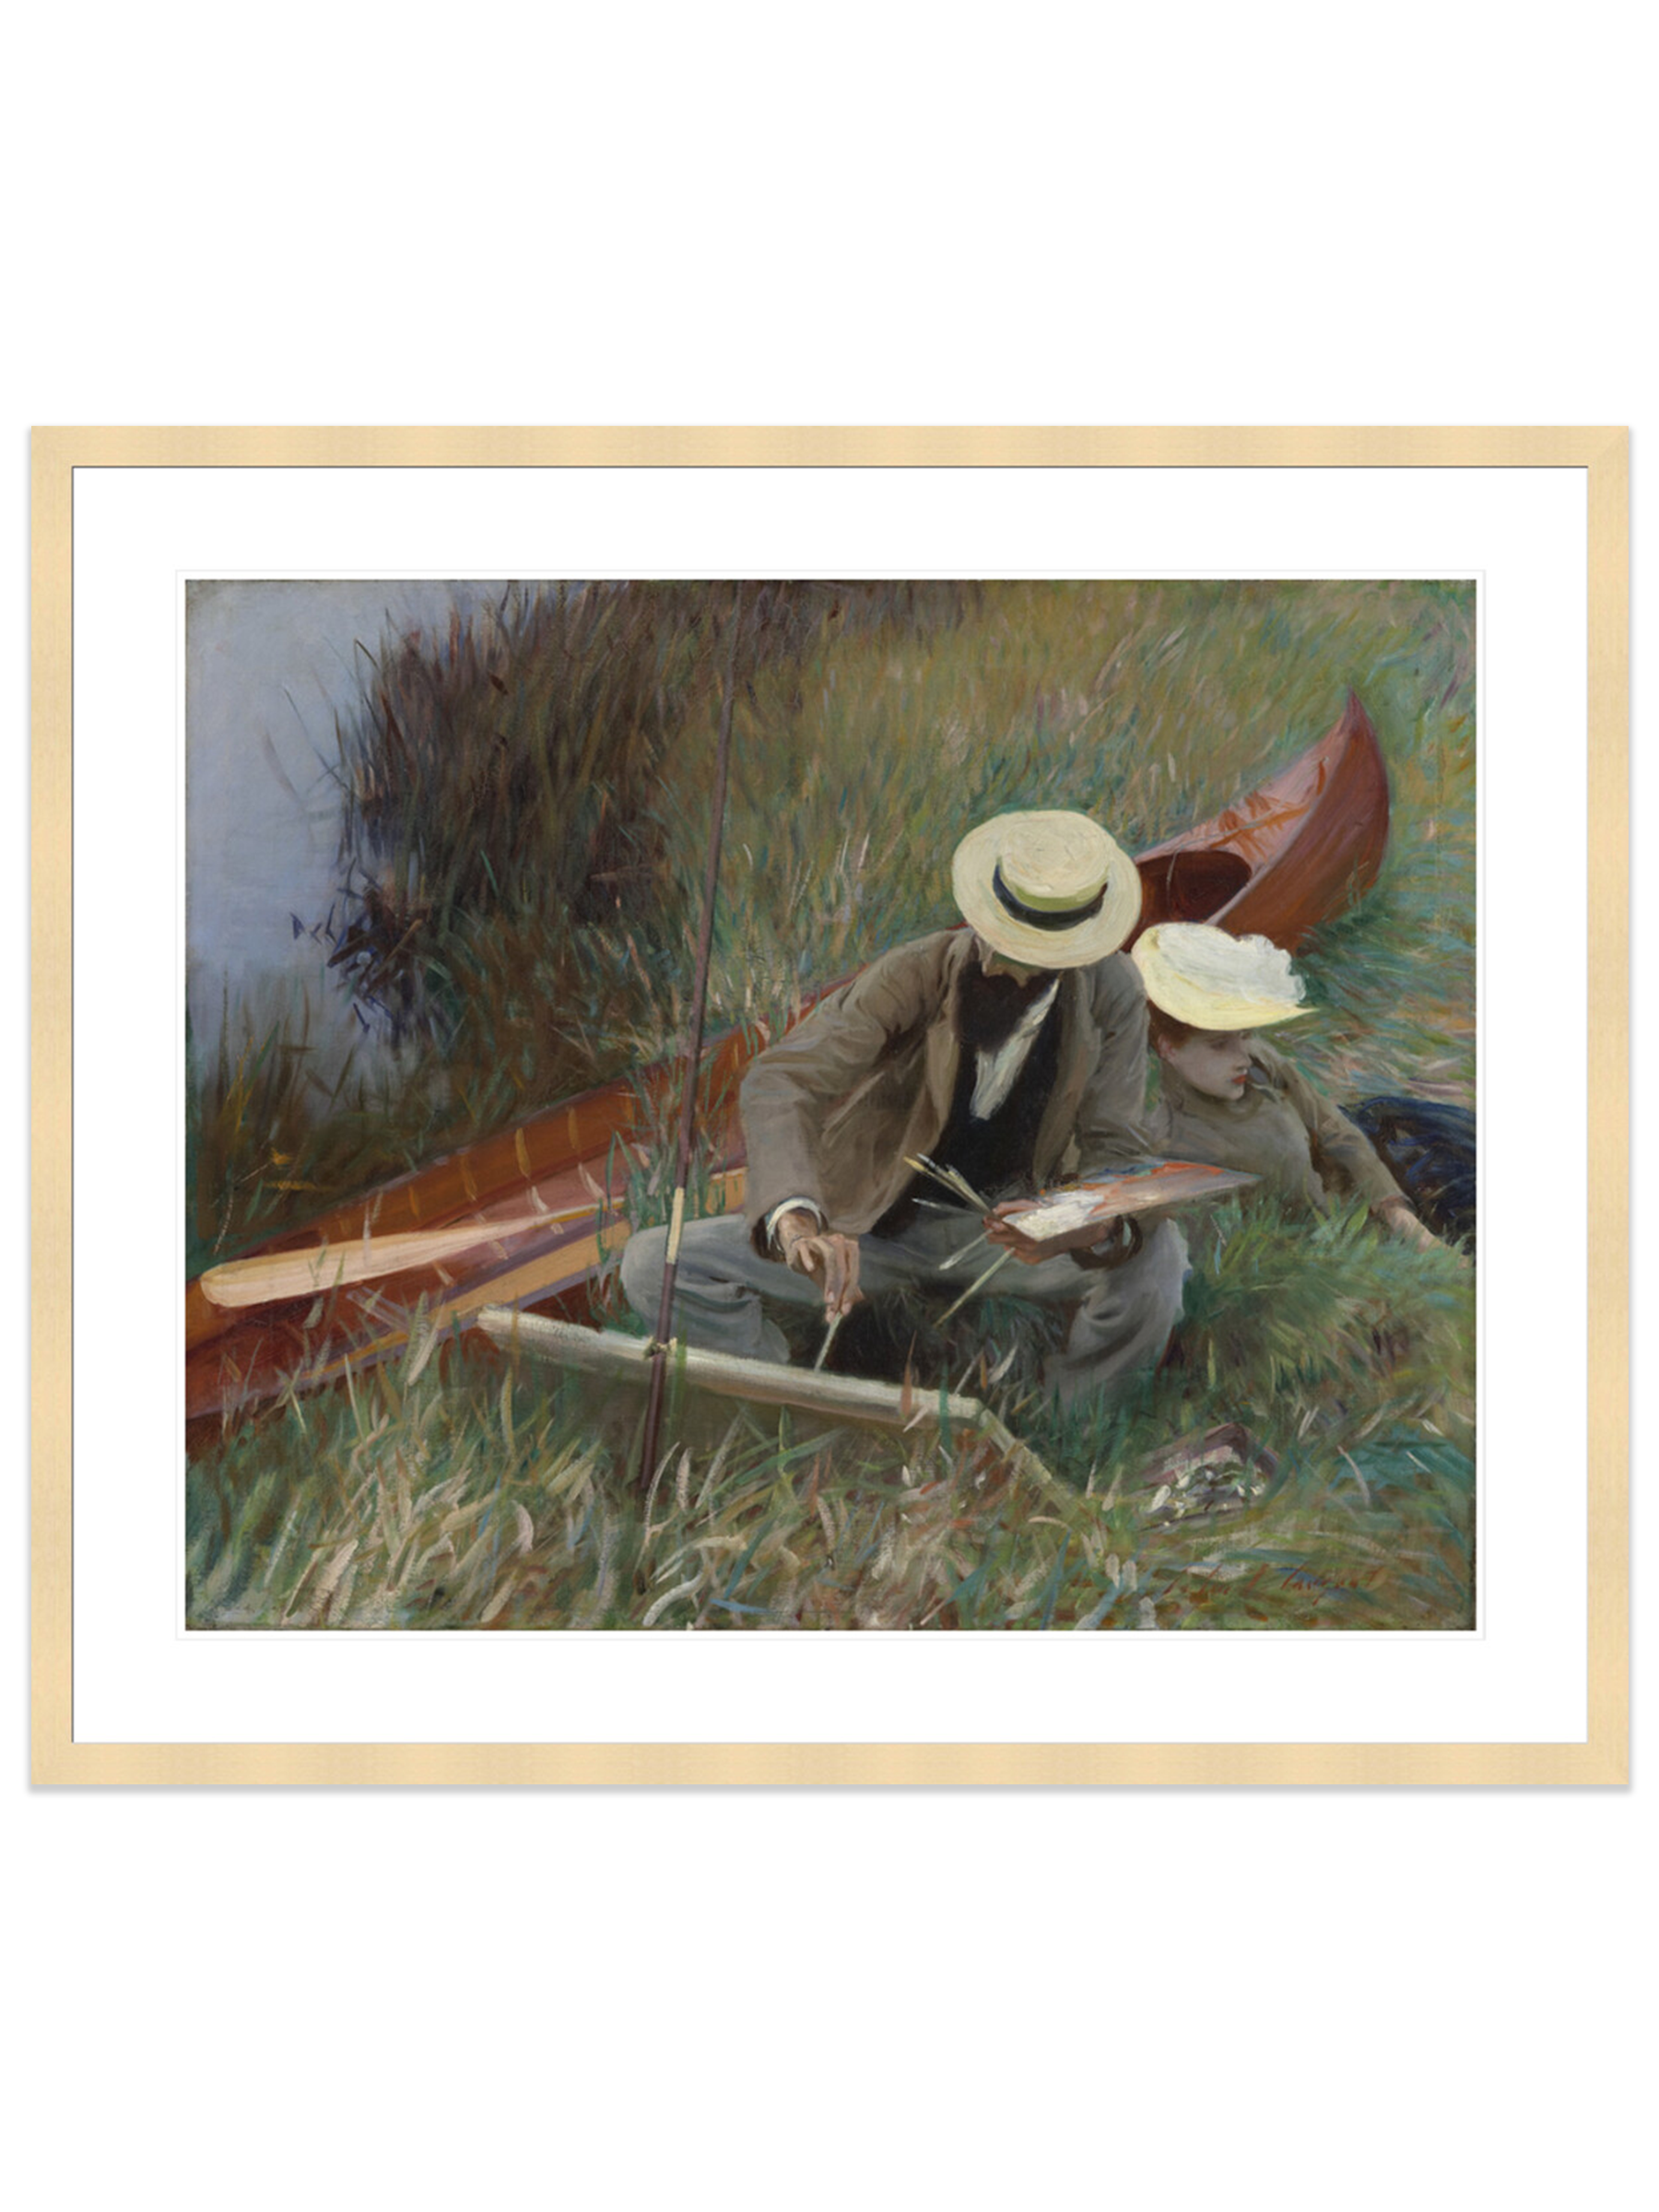 An Out-of-Doors Study (Print) by John Singer Sargent